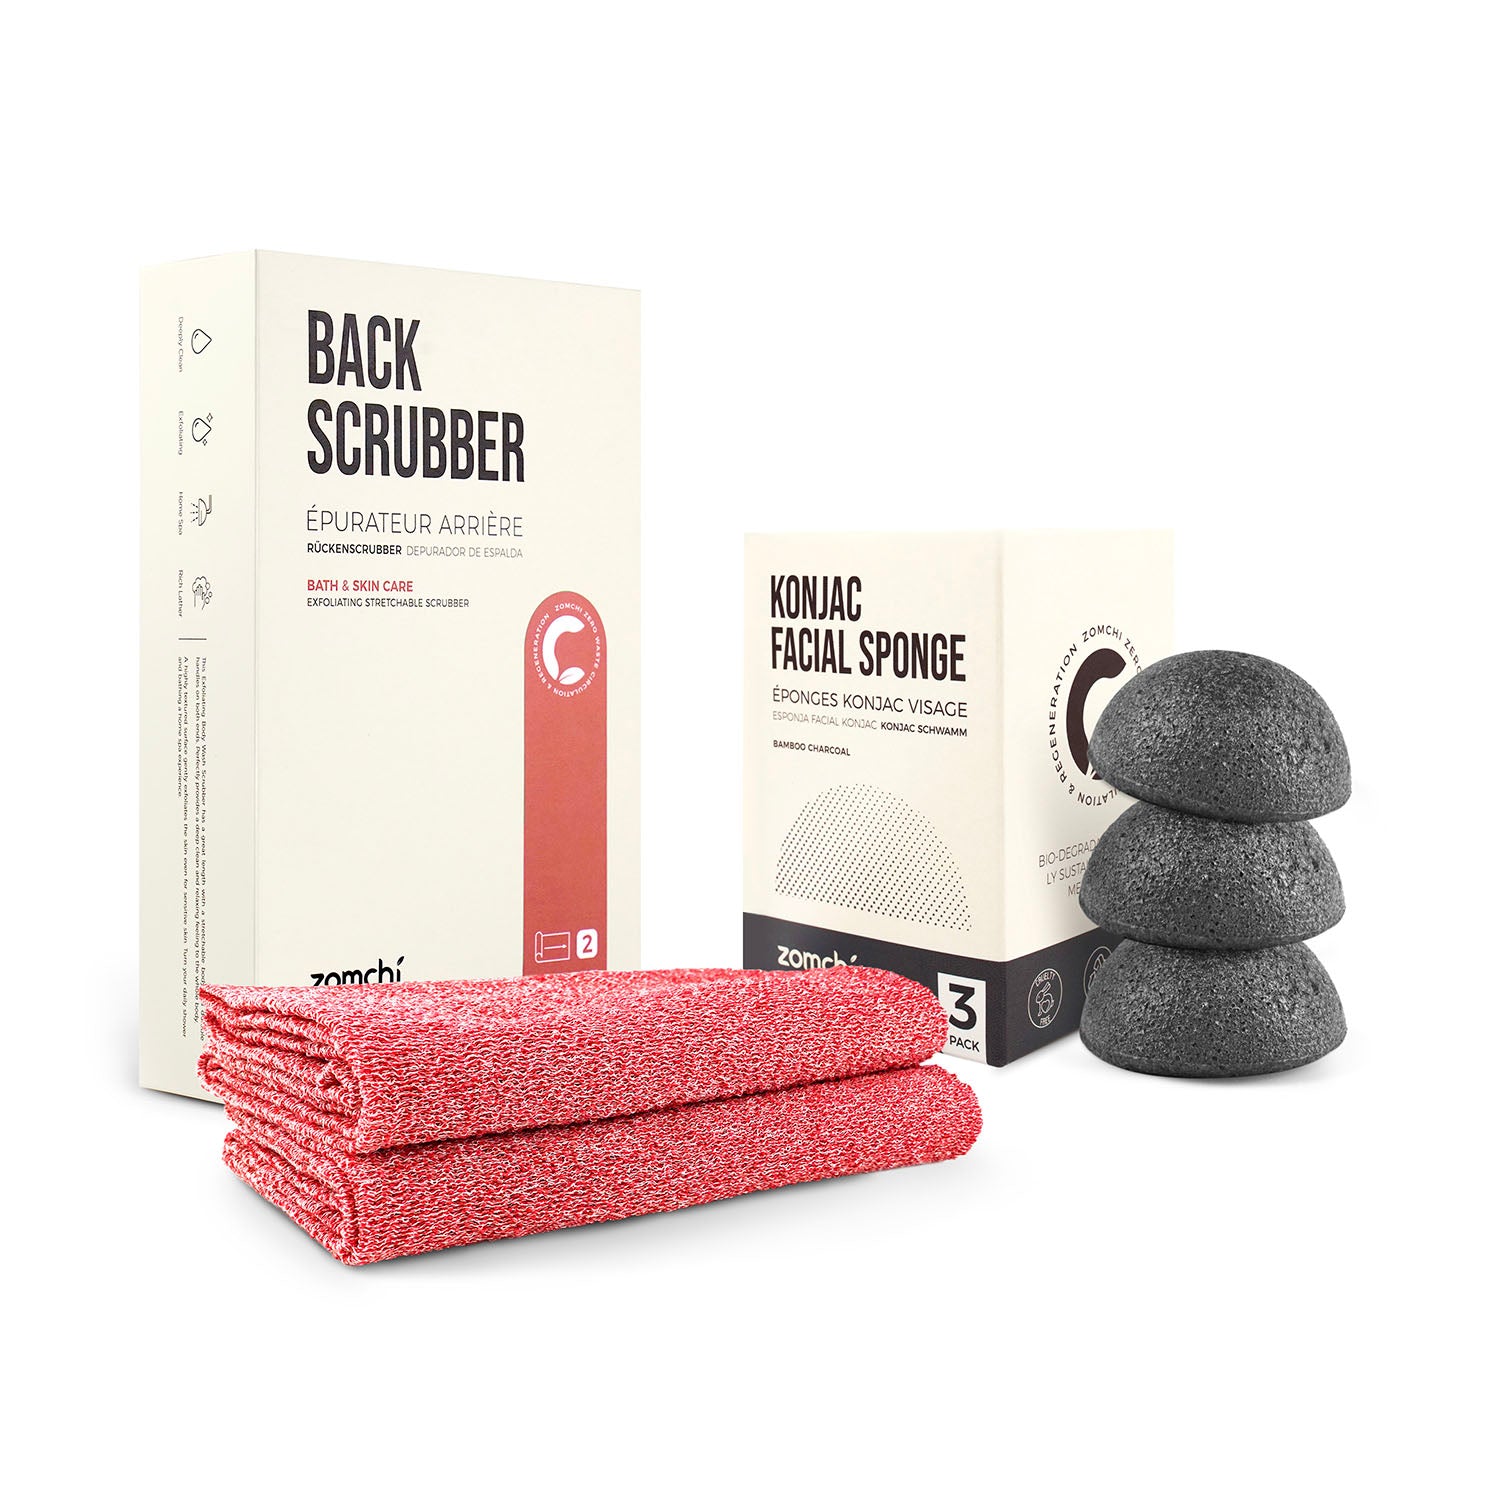 2 Pieces Red Exfoliating Back Scrubber with Facial Sponges